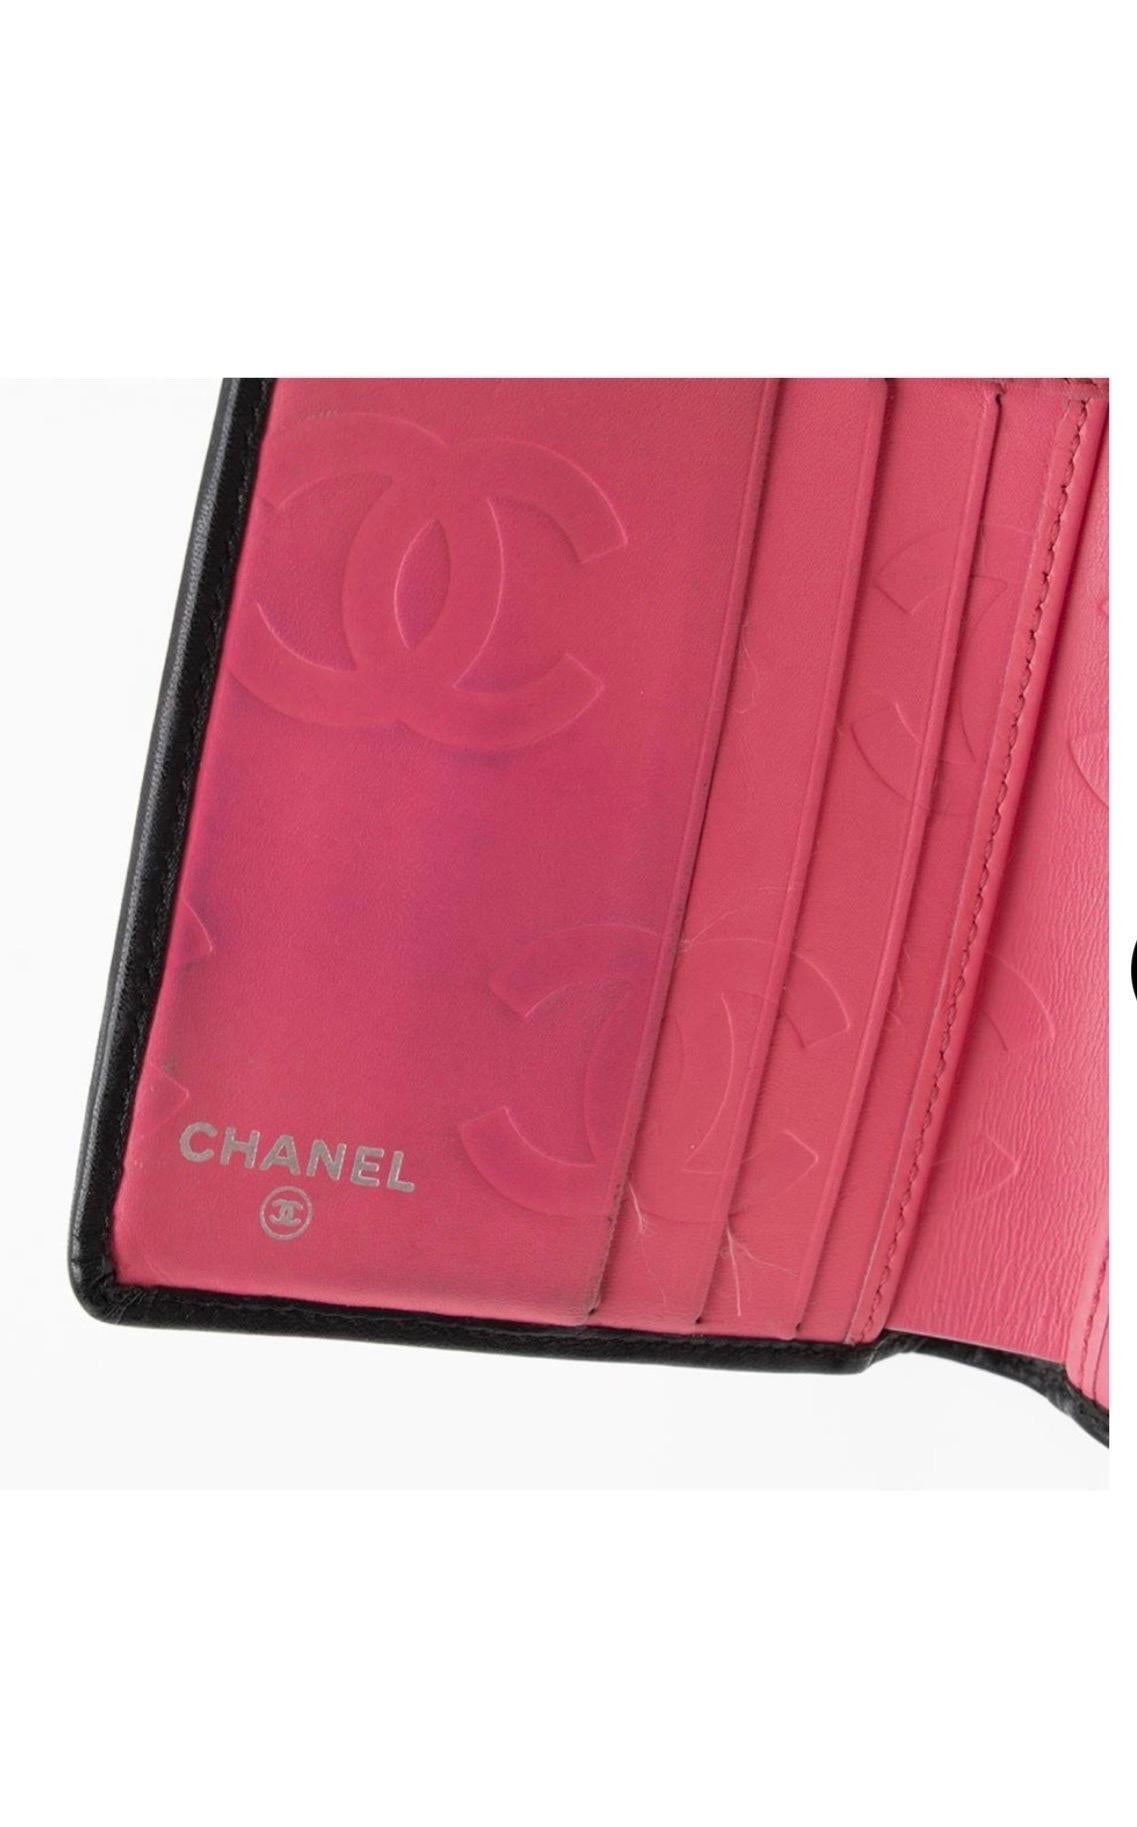 Chanel Cambon Line Chain Wallet Leather Enamel Leather Black Sil No.9608651

Date Code/Serial Number: 9608651
Made In: France
Measurements: Length:  4